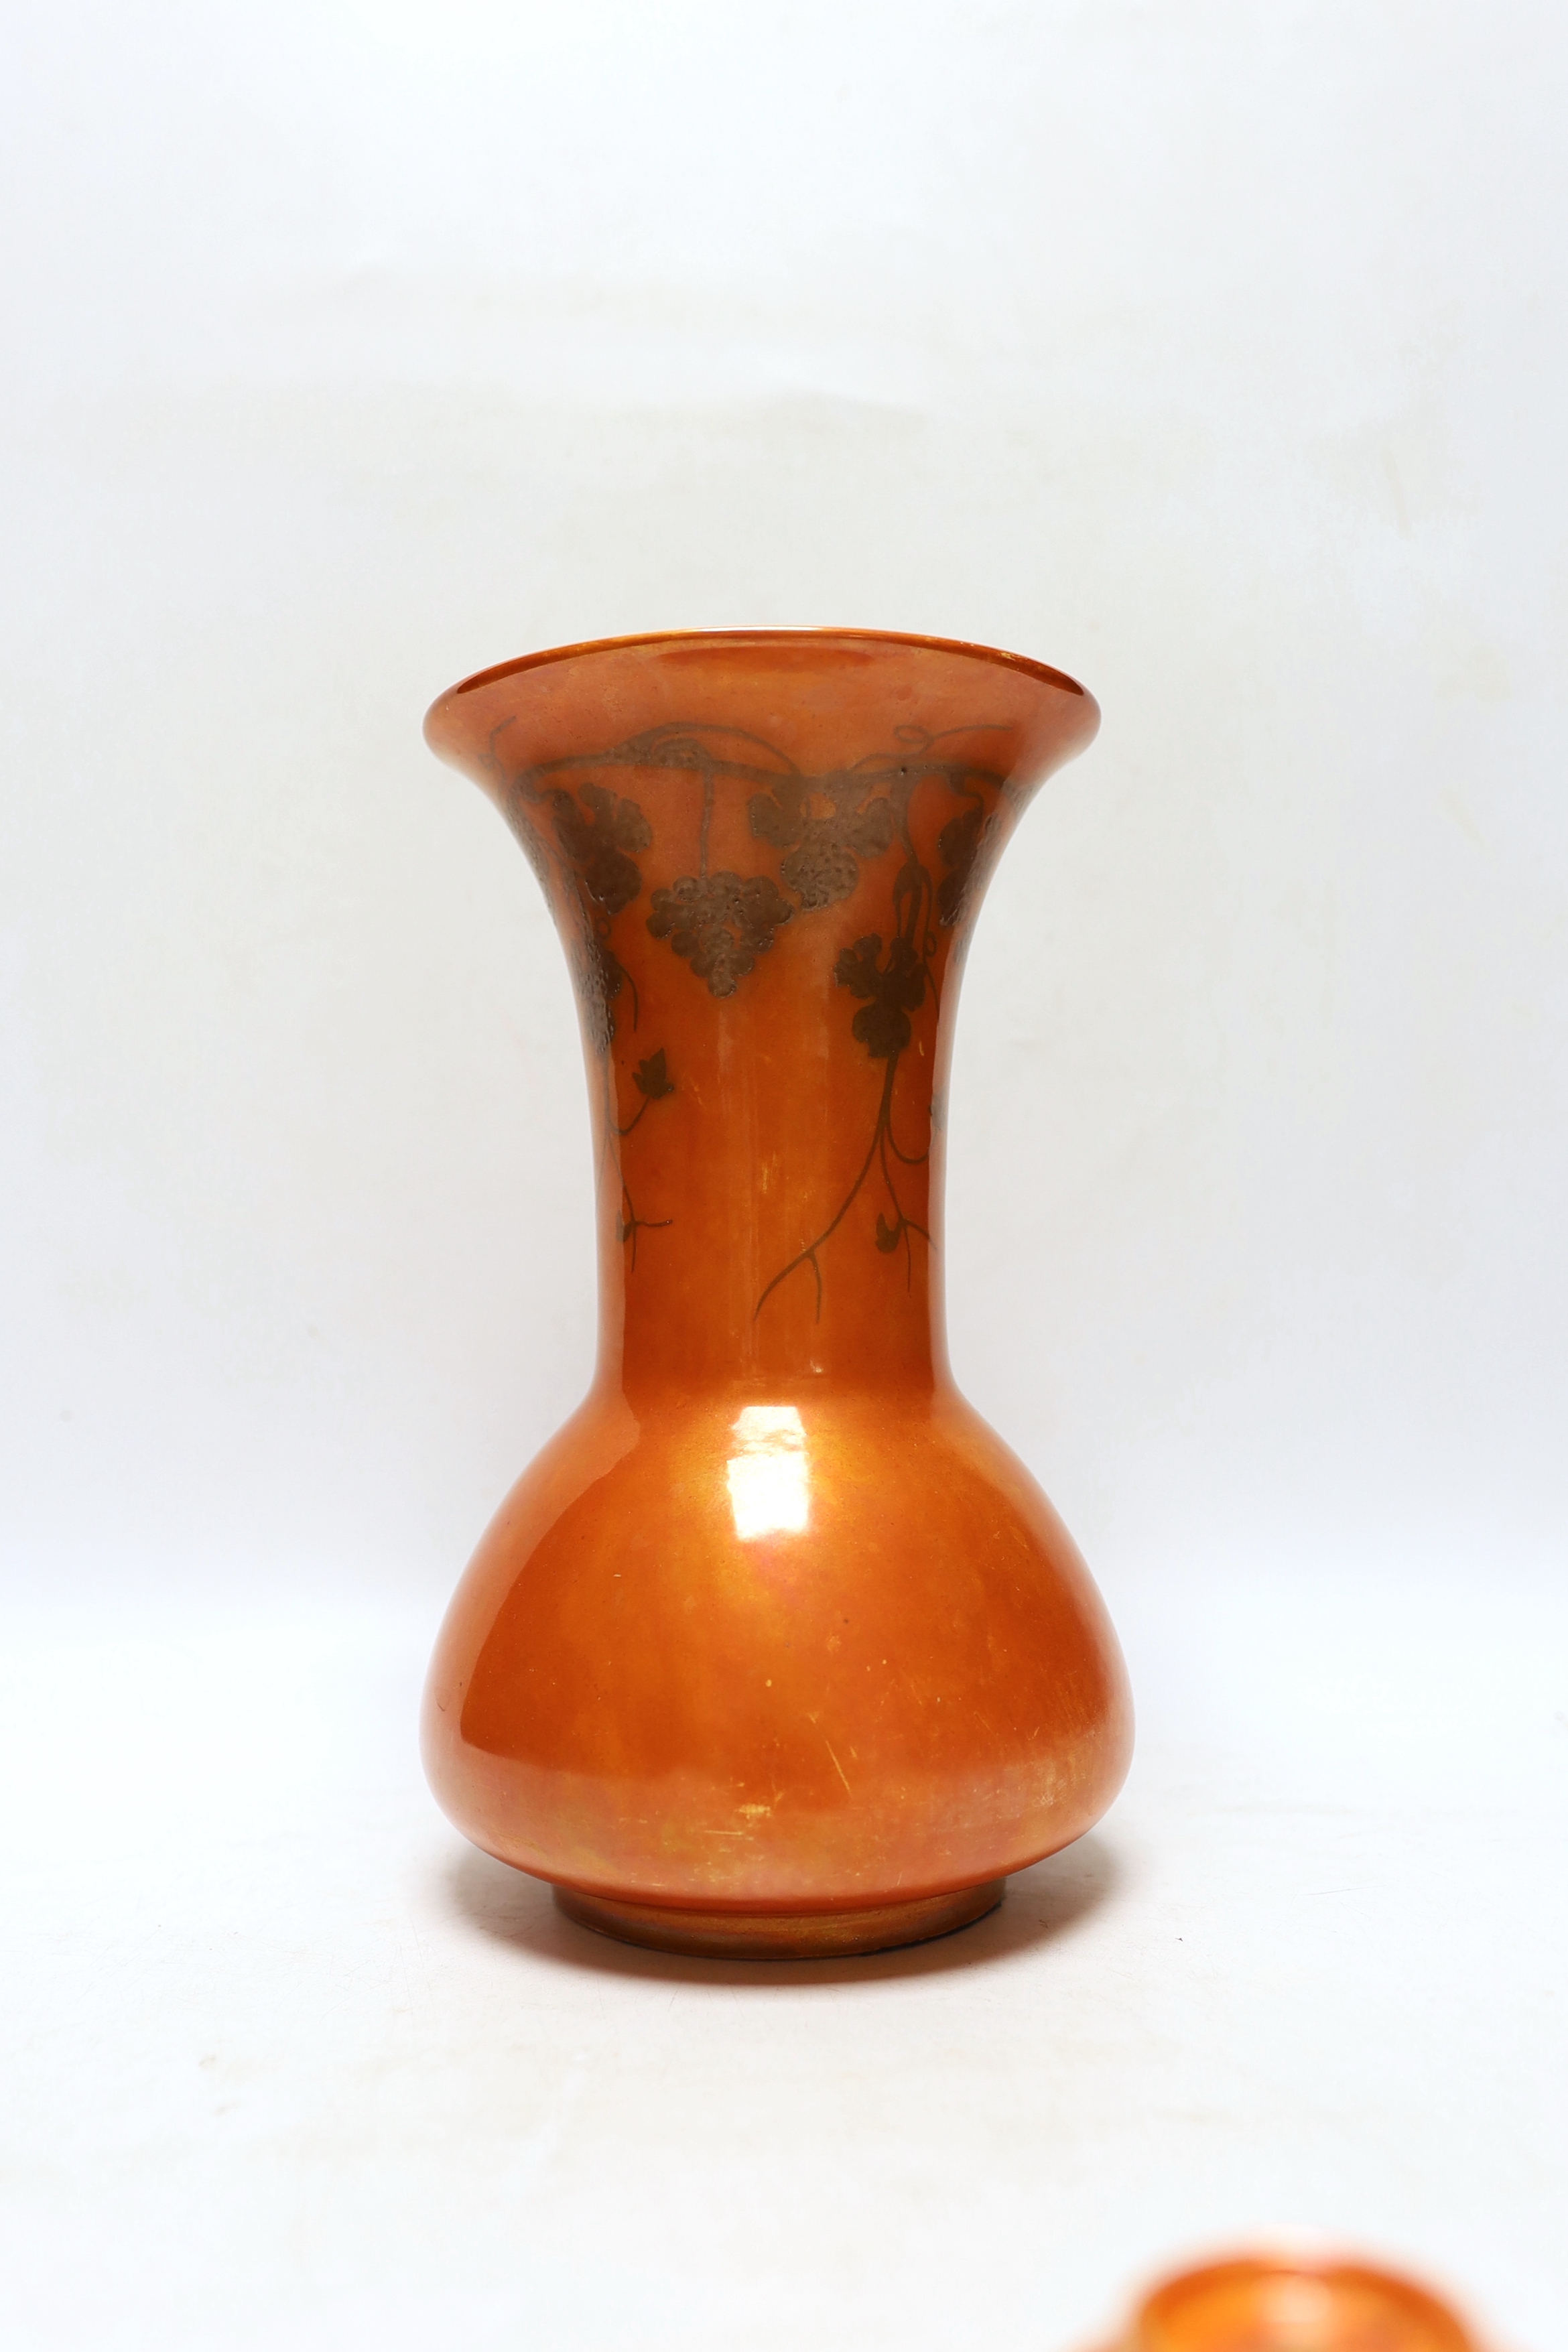 A Ruskin orange glazed vase (a.f) and three similar small bowls by Ruskin and Doulton, vase 23.5cm